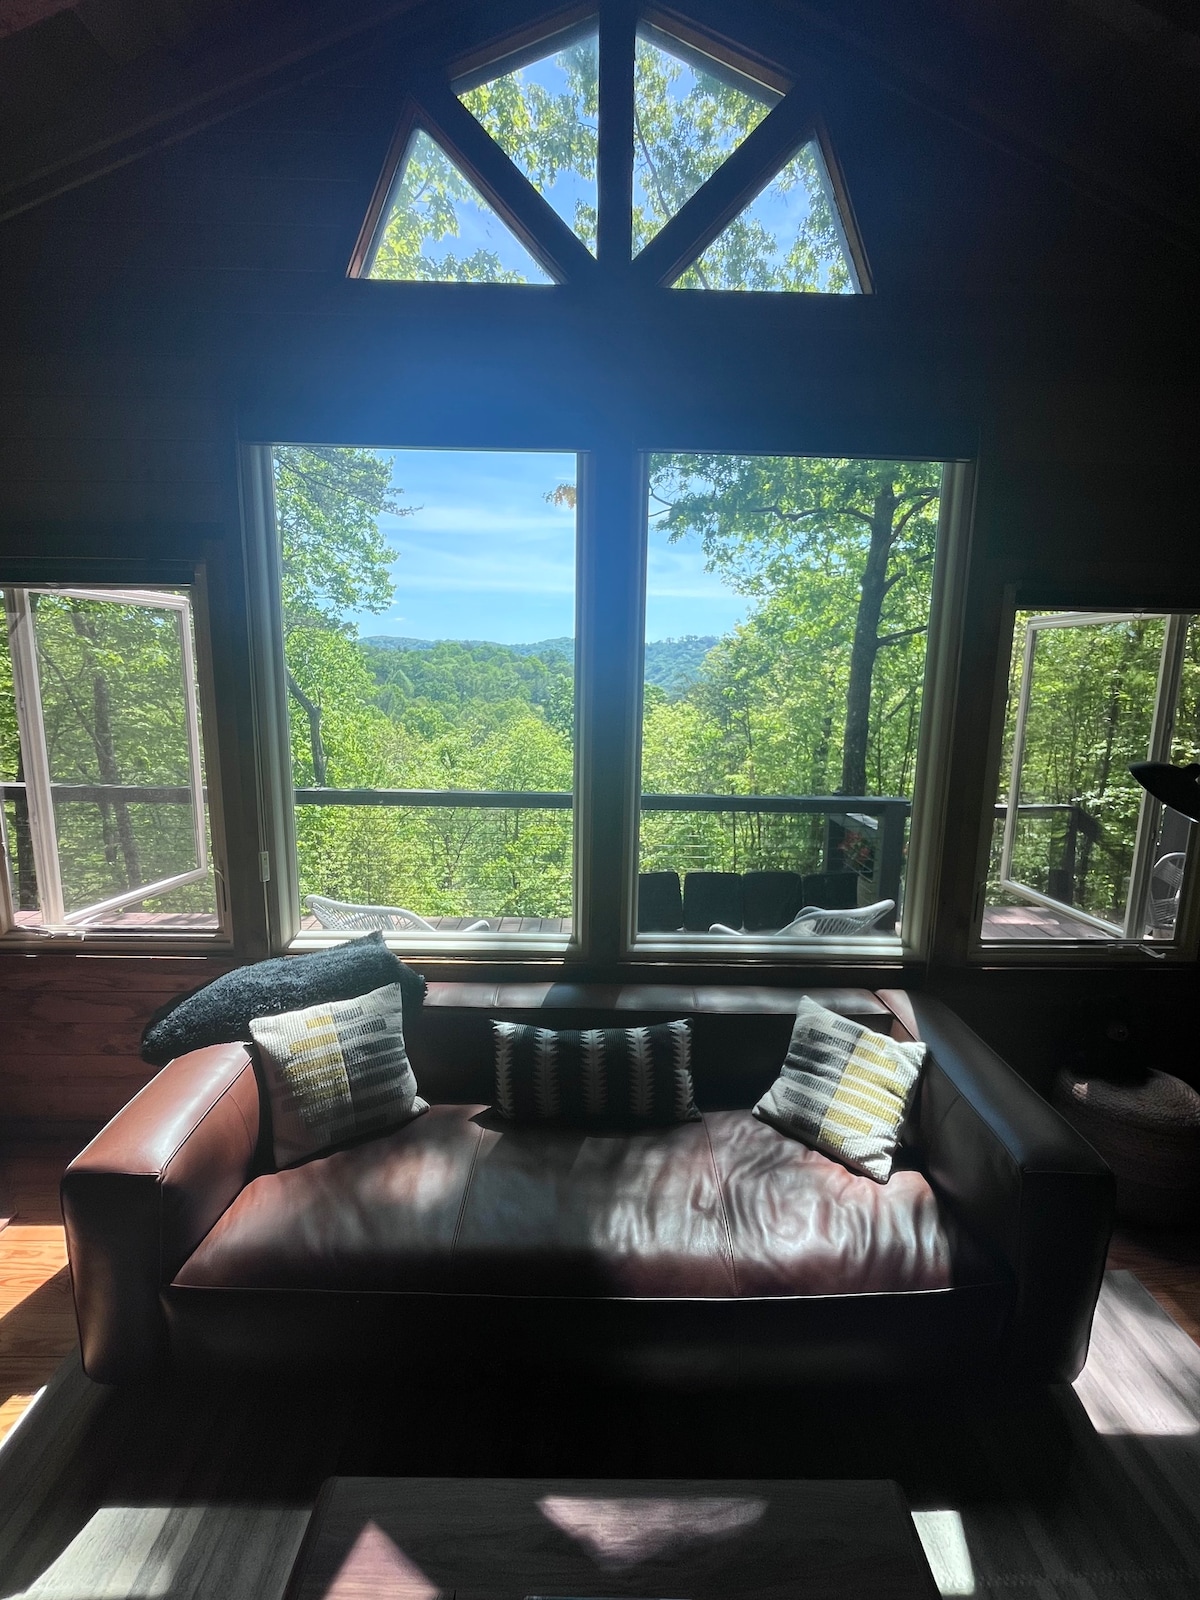 Couple’s cabin: Private, Views, Indoor hot tub, EV